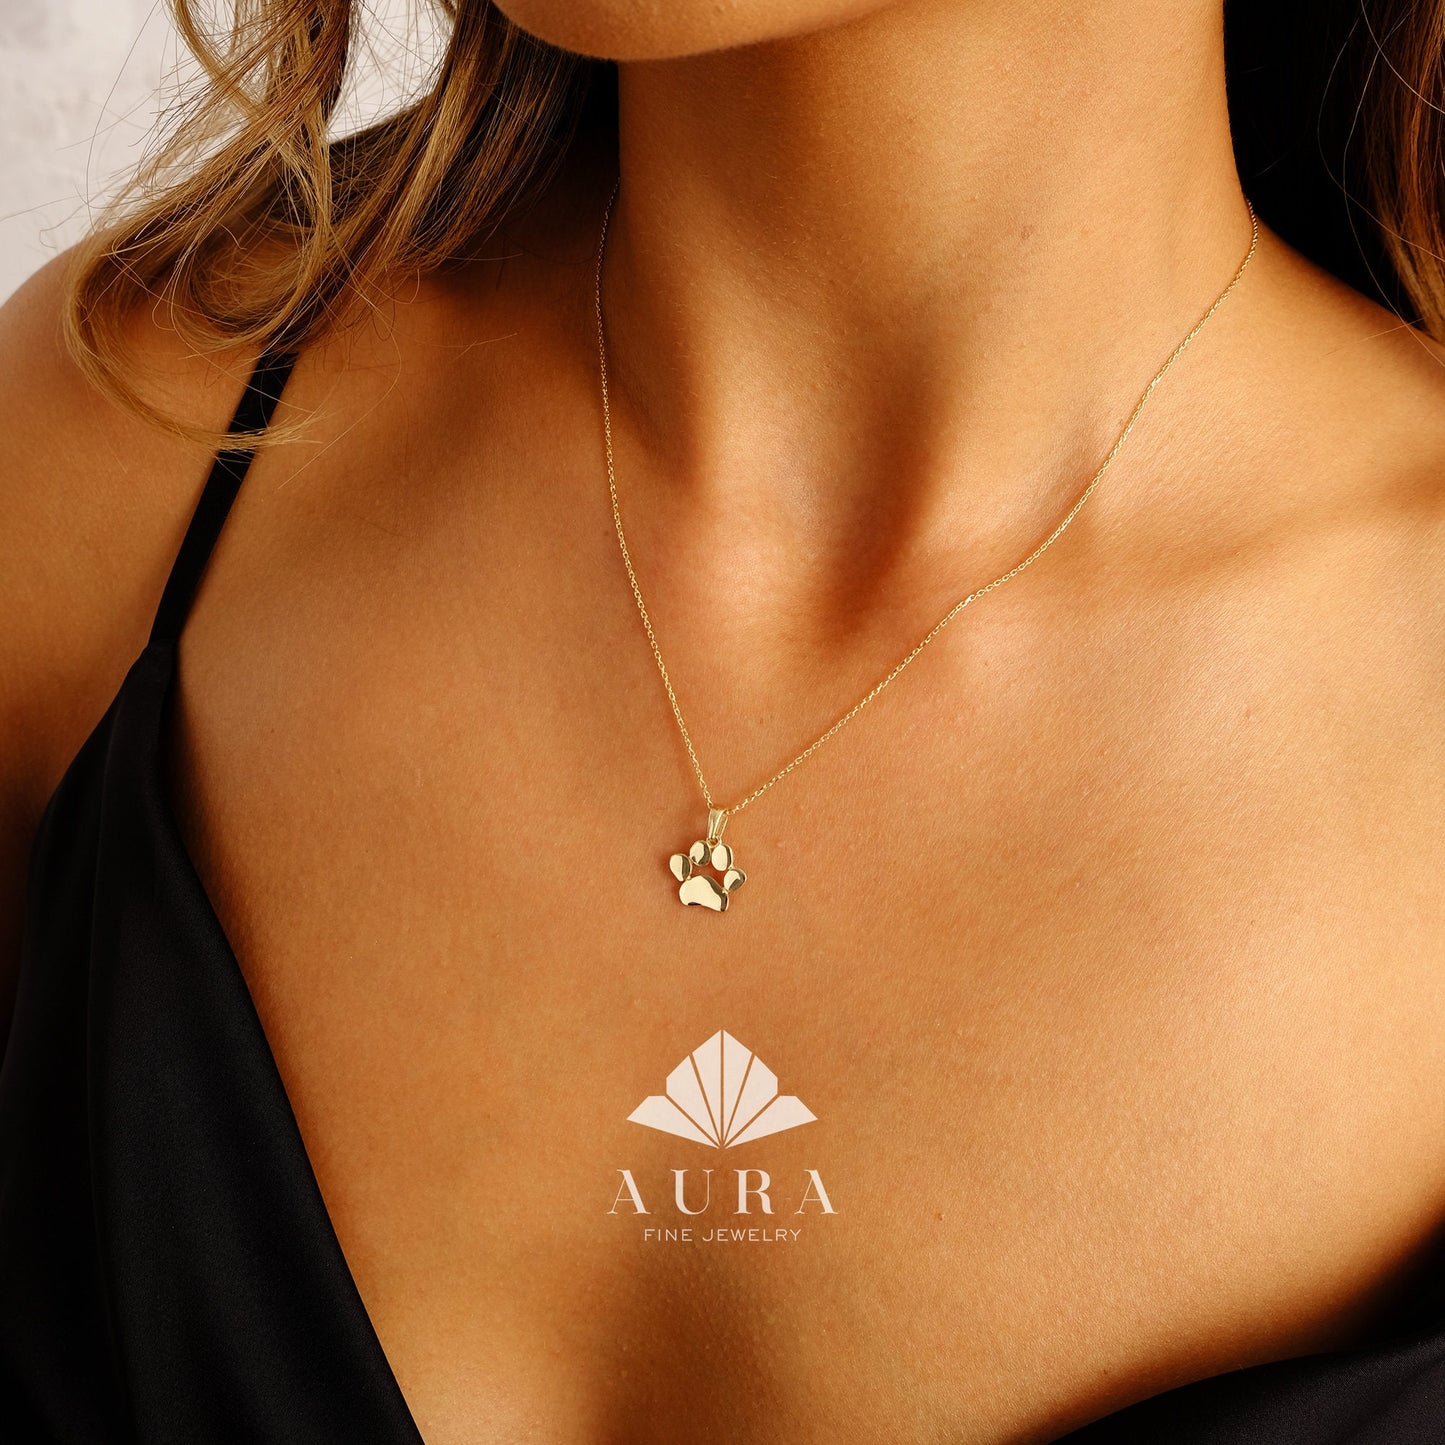 14K Gold Paw Print Necklace, Dog Paw Pendant Necklace, Engraved Pet Paw Print Charm, Pet Memorial Necklace, Personalized Paw, Gift